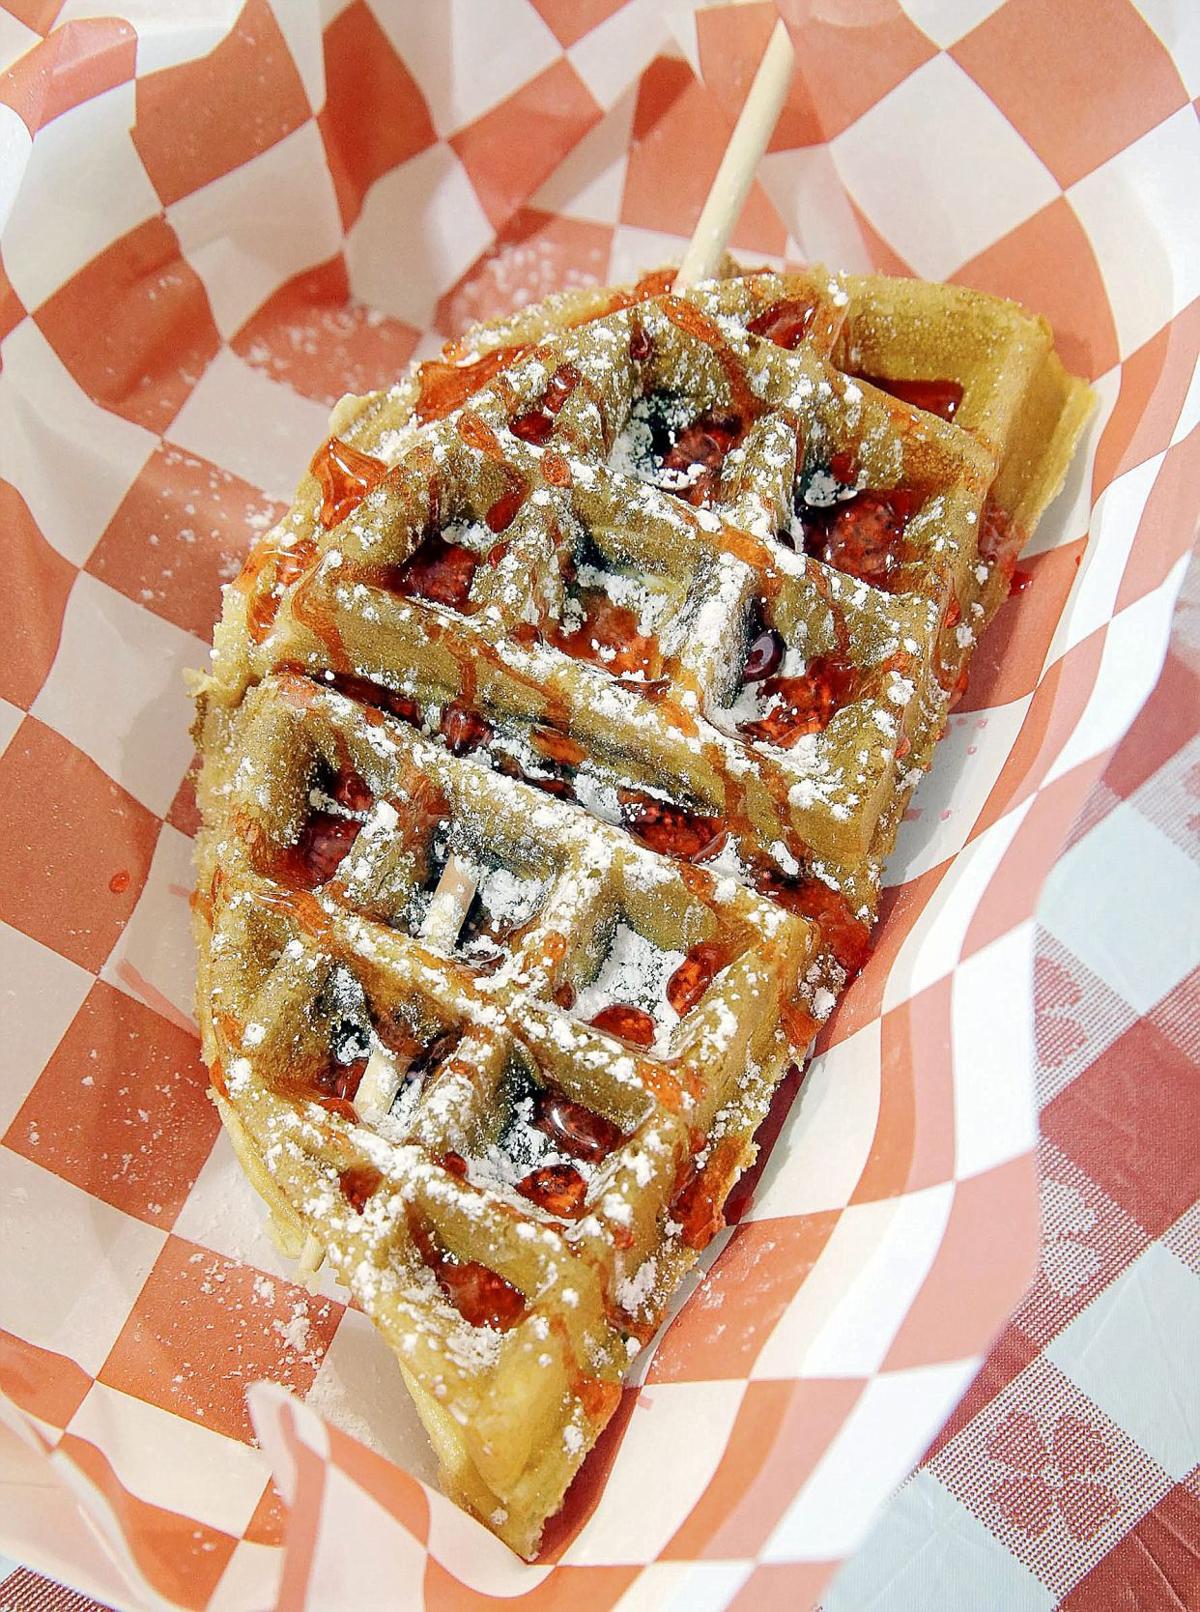 The newest foods at the Tulsa State Fair | Archive | www.bagsaleusa.com